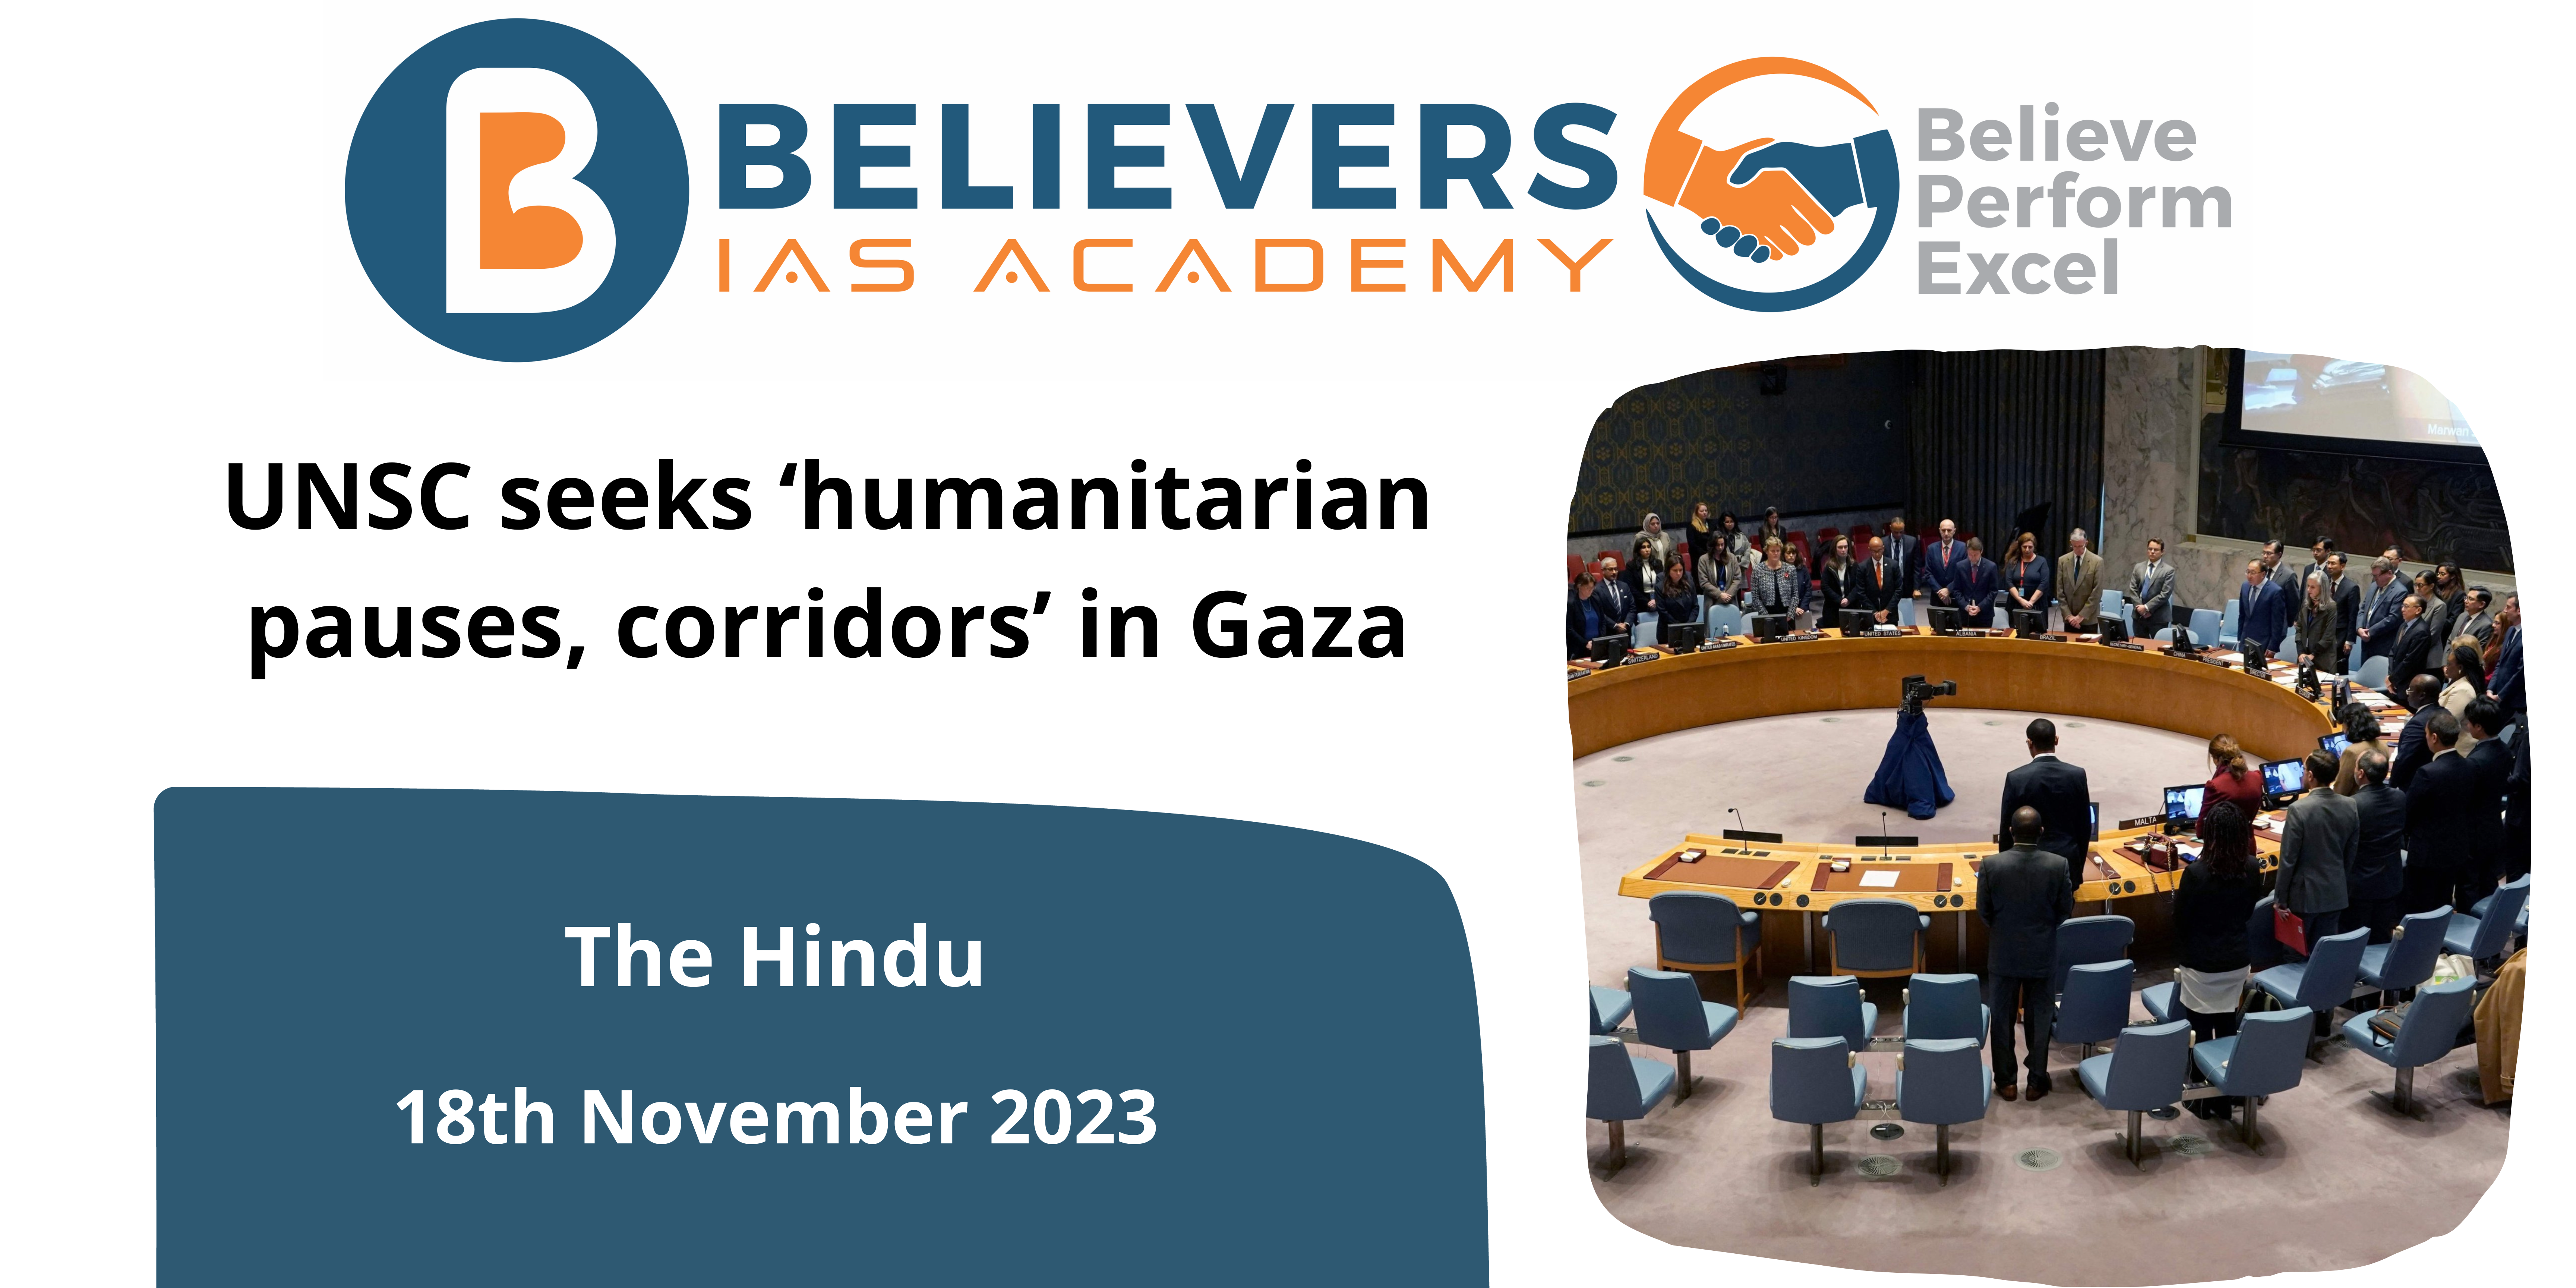 Current Affairs News for UPSC- UNSC seeks ‘humanitarian pauses, corridors’ in Gaza